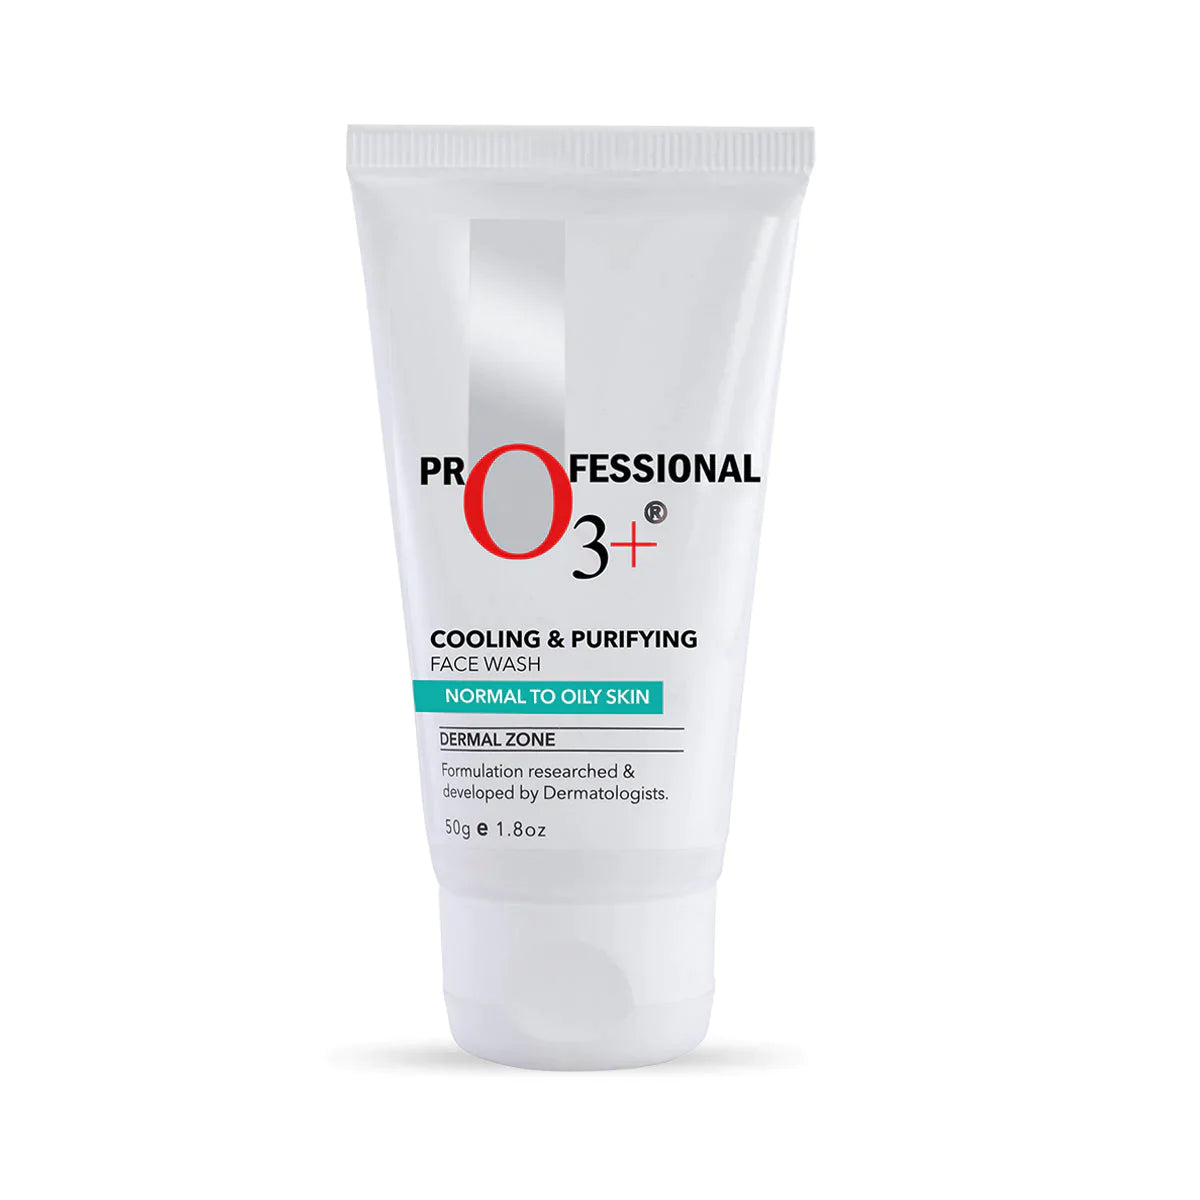 O3+ Cooling Purifying Tea Tree Face Wash, 50g face Wash from O3+